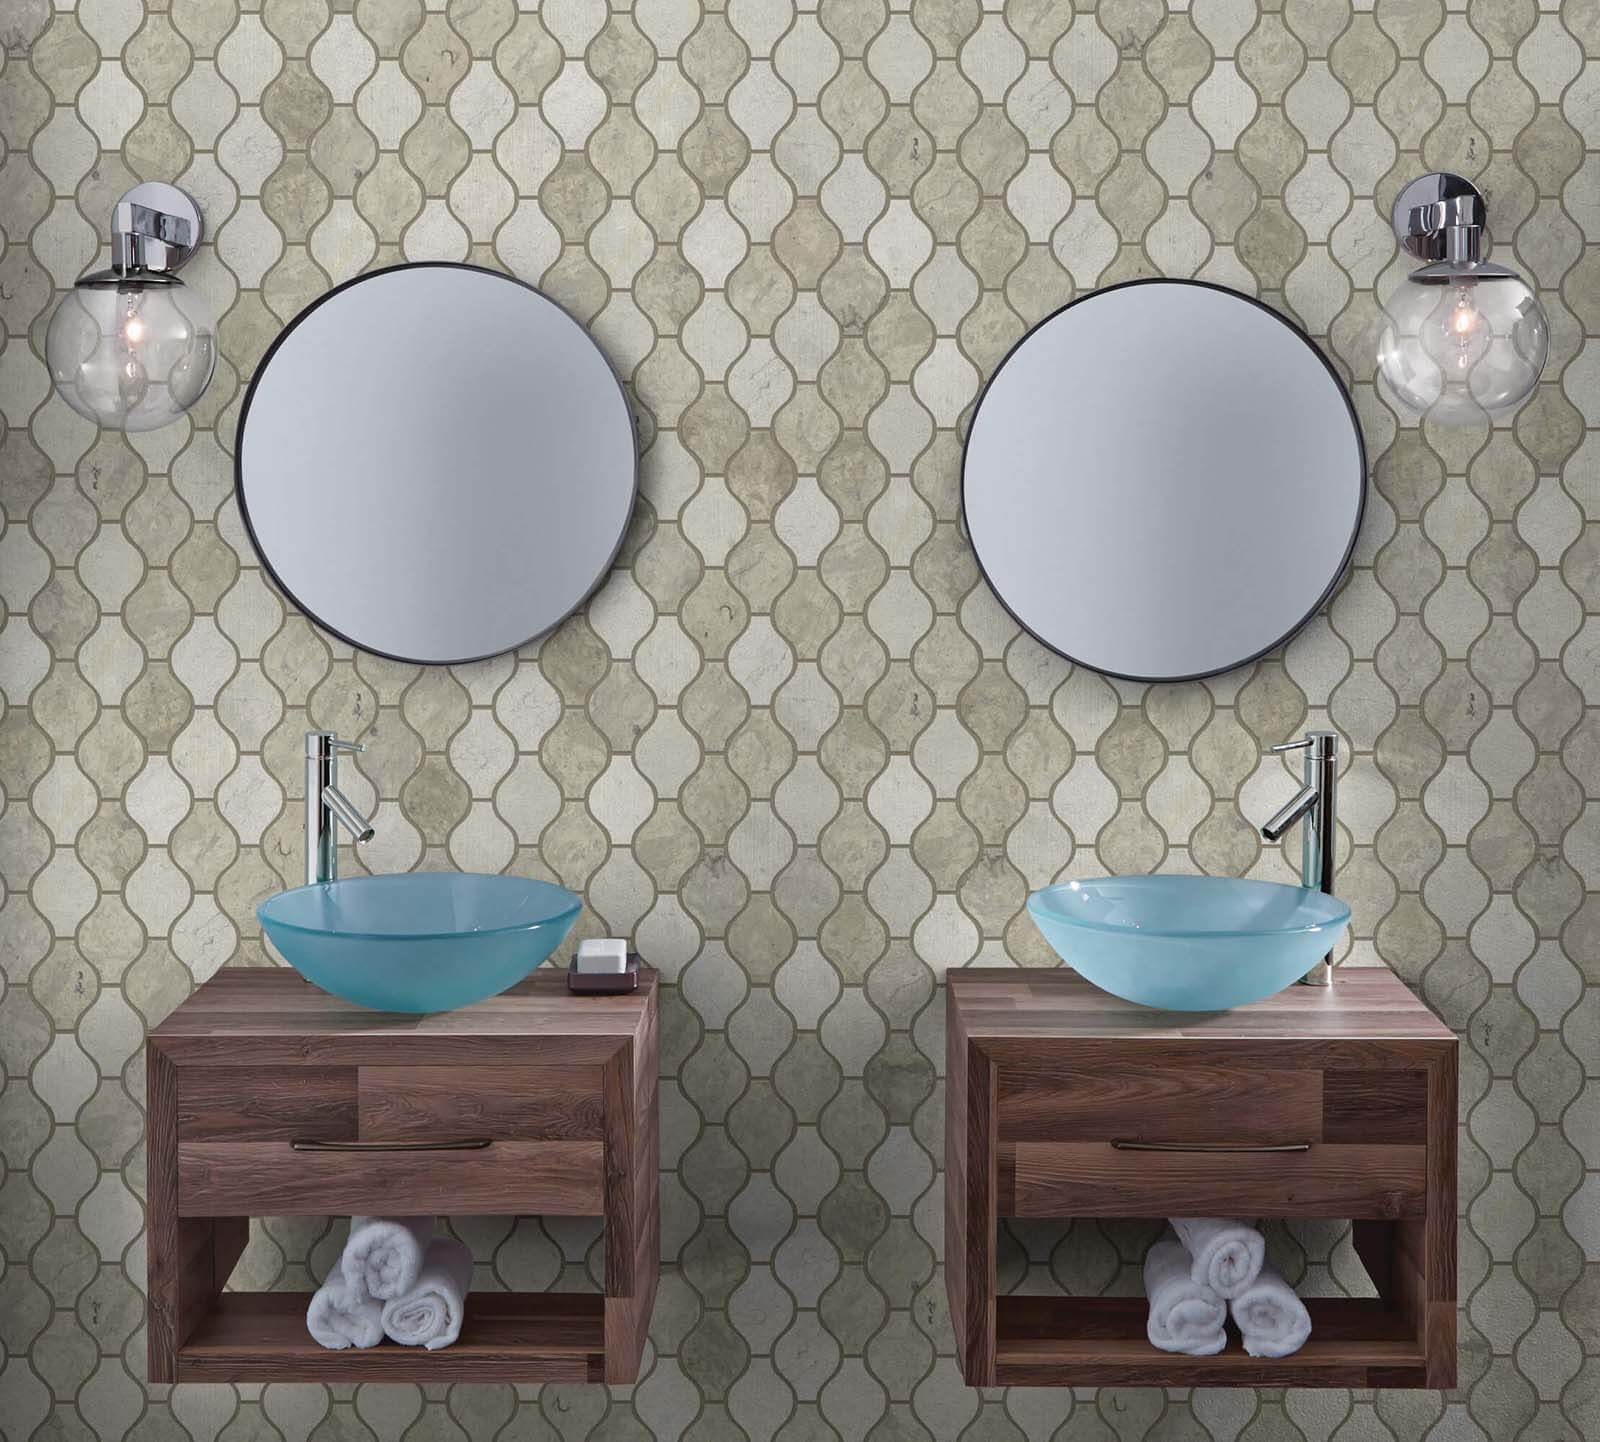 Bathroom sink with mirror | The L&L Company